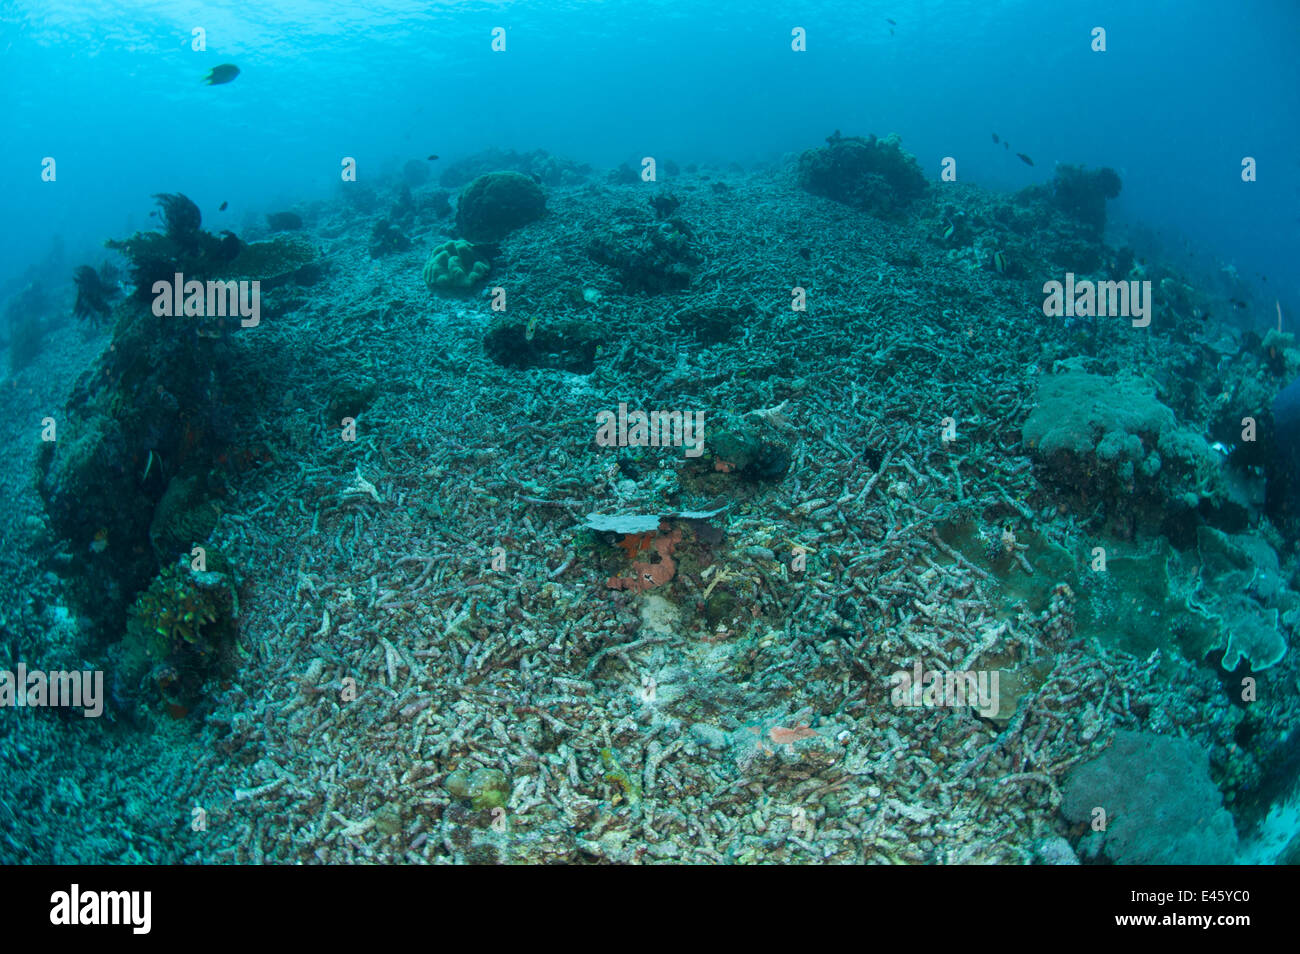 https://c8.alamy.com/comp/E45YC0/old-coral-reef-destroyed-by-dynamite-fishing-new-corals-are-not-able-E45YC0.jpg